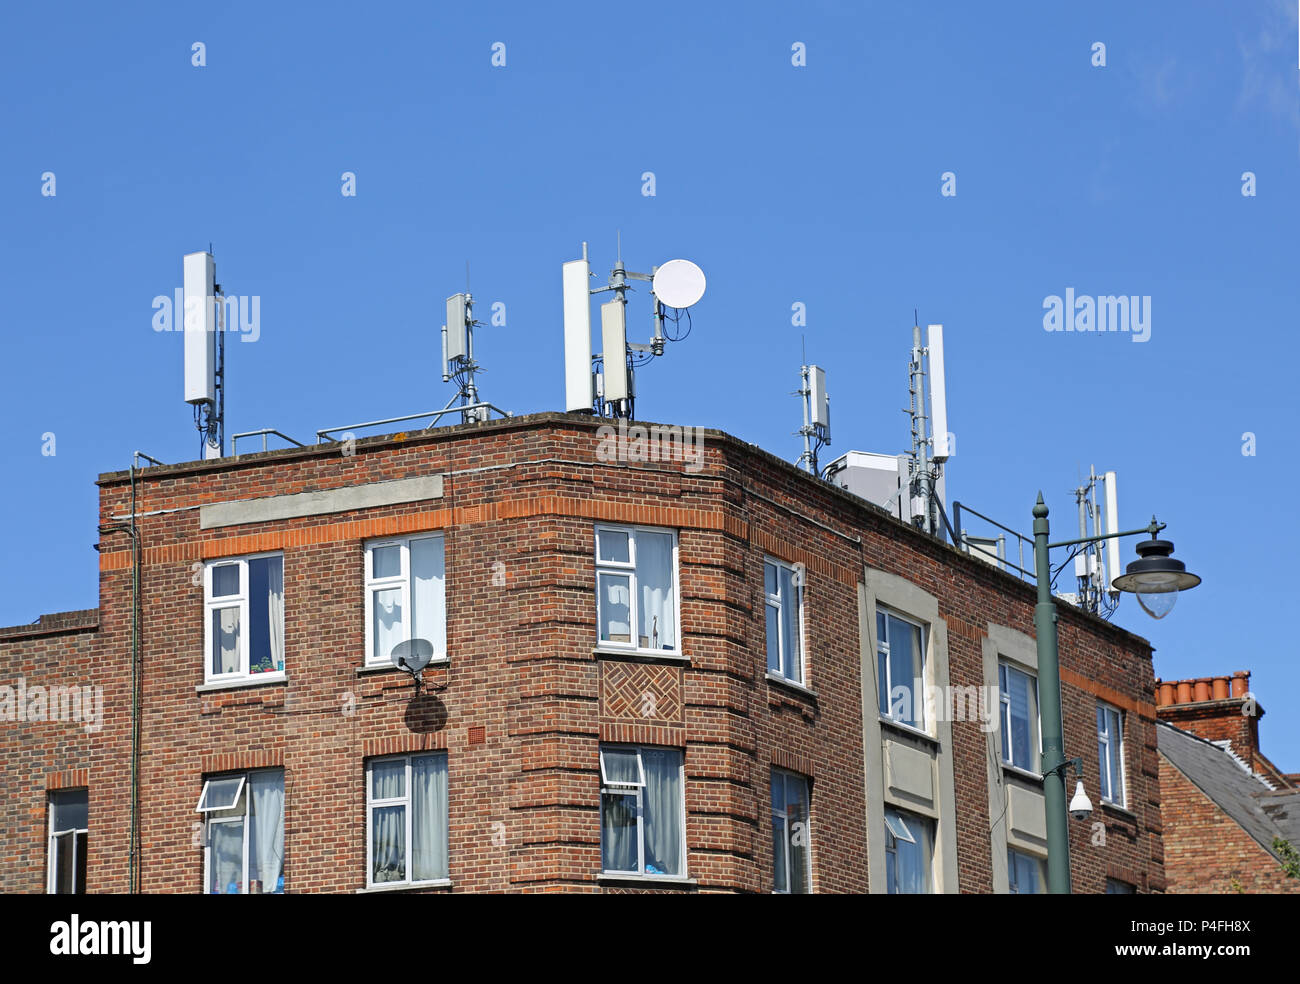 Mobile Phone antenna on the roof of a residential building in Tulse Hill, South London, UK Stock Photo